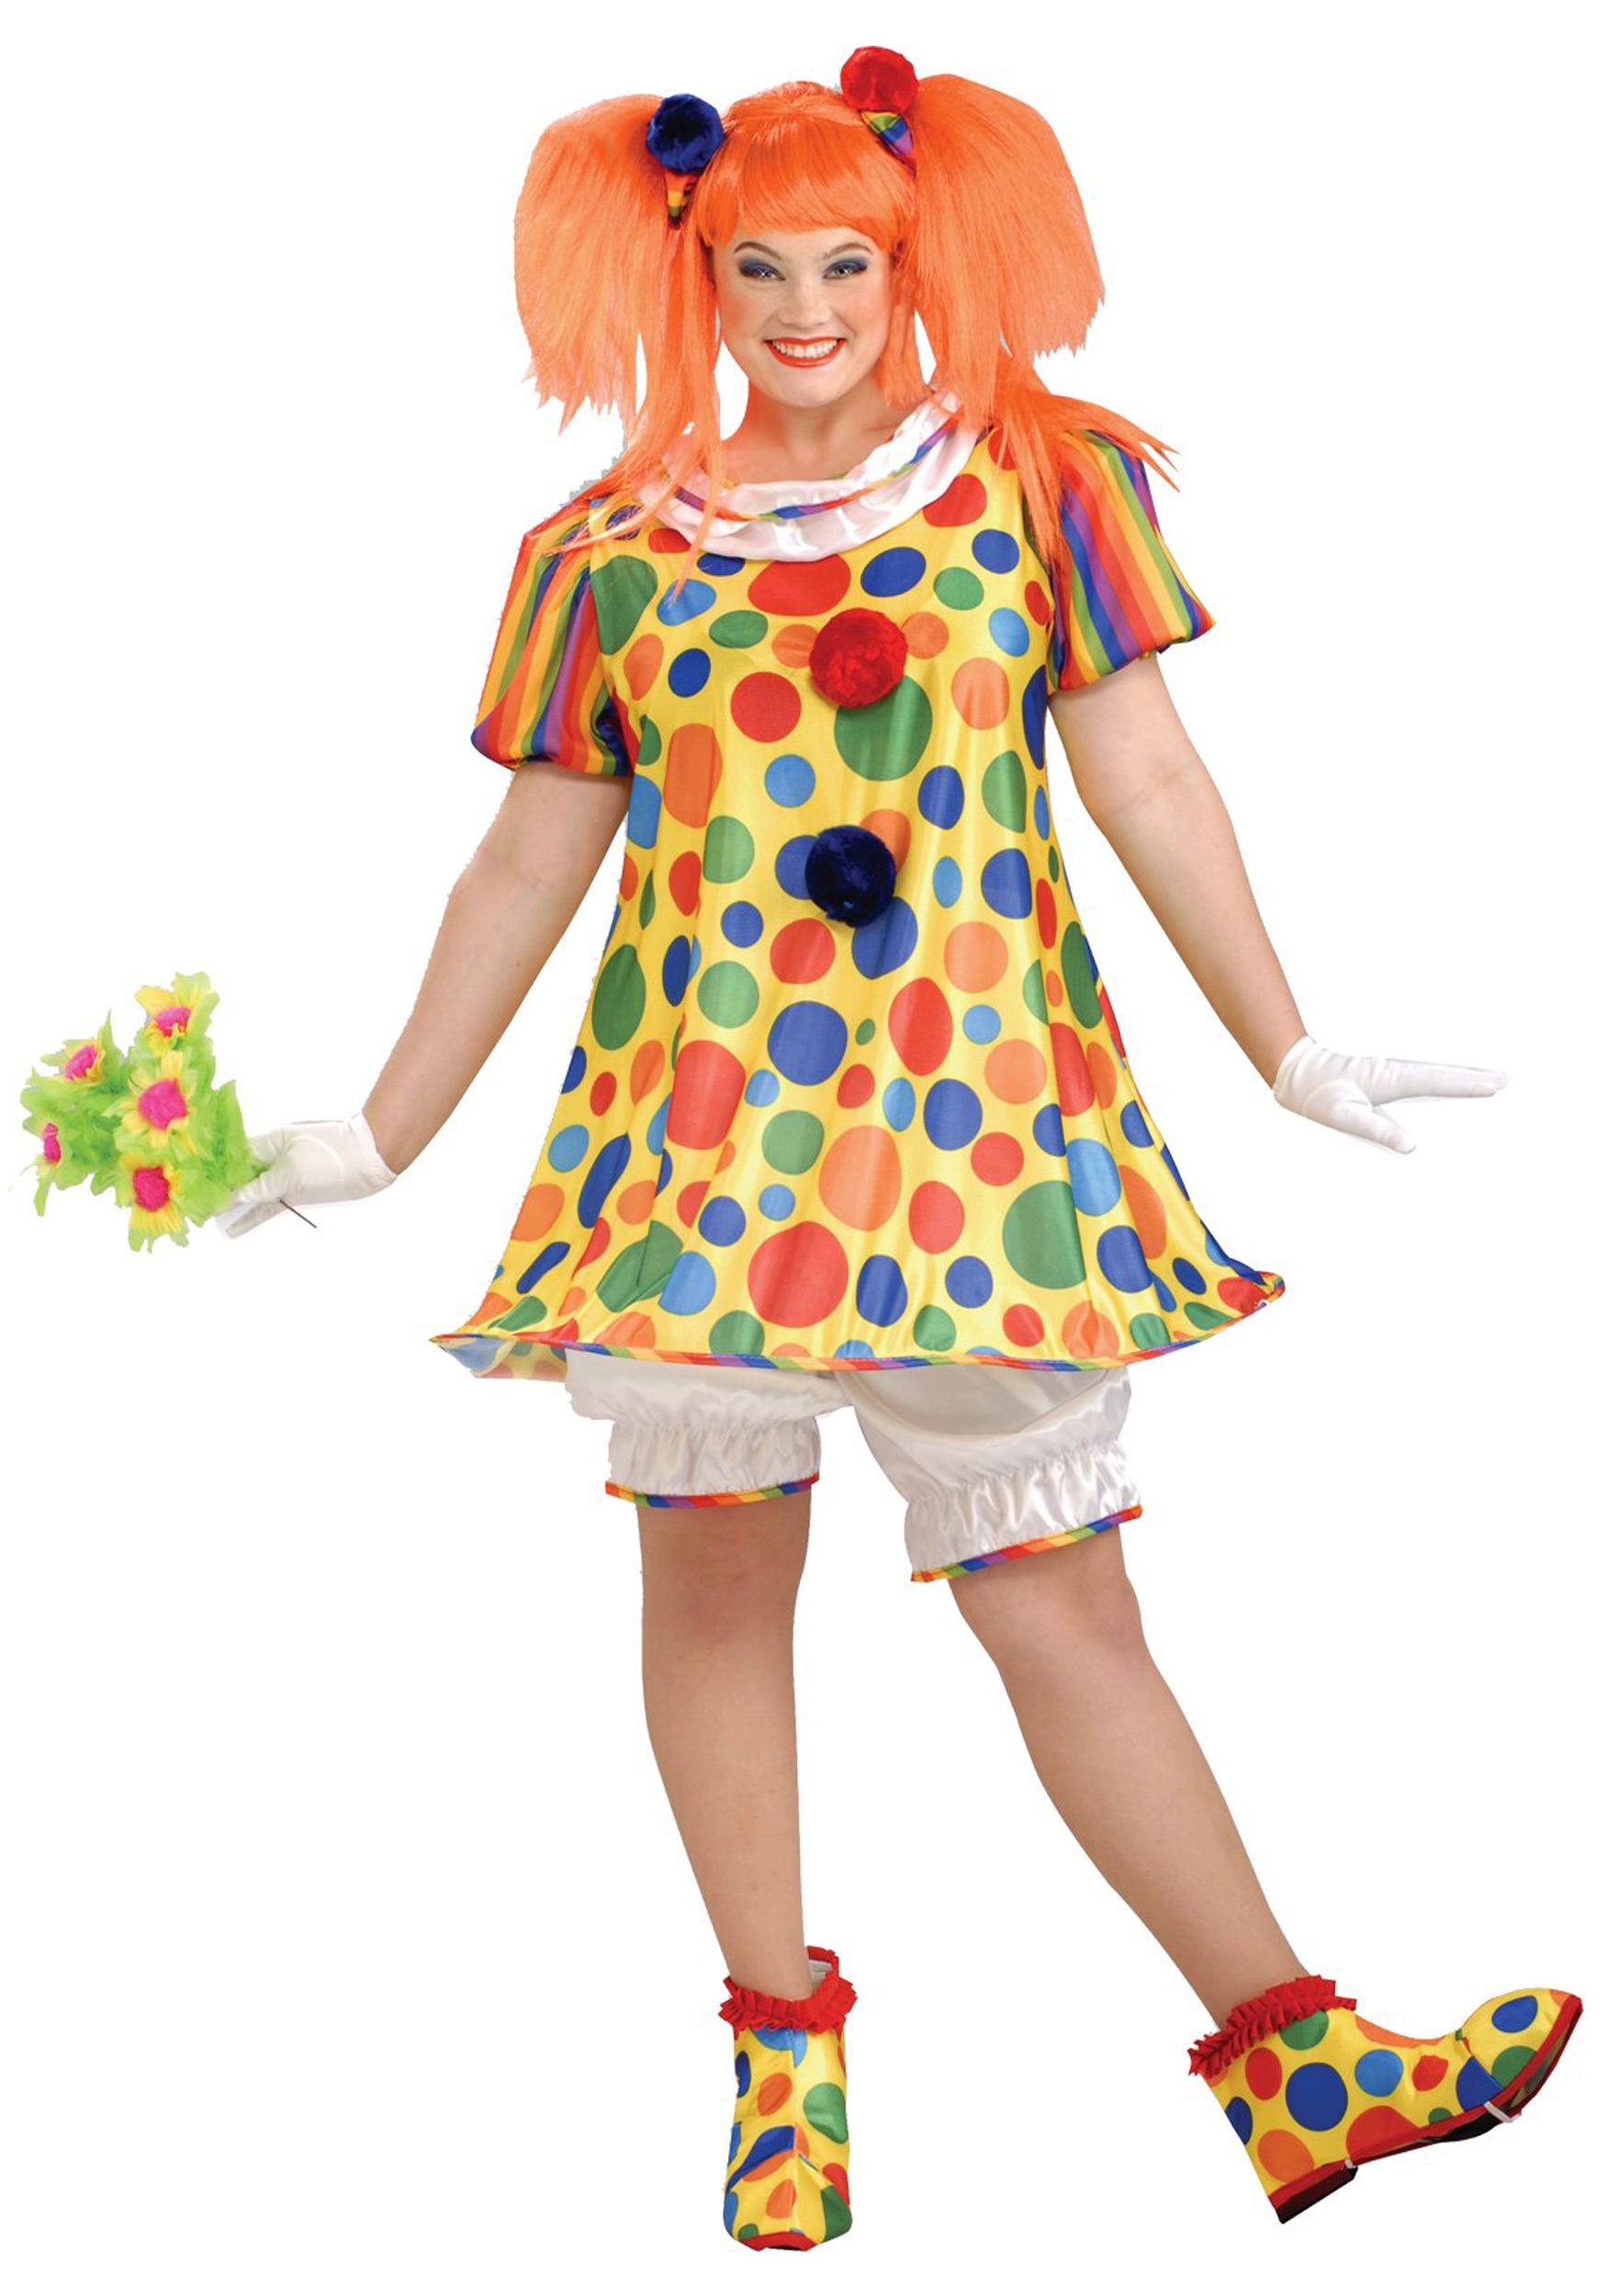 Women’s Plus Size Giggles the Clown Costume